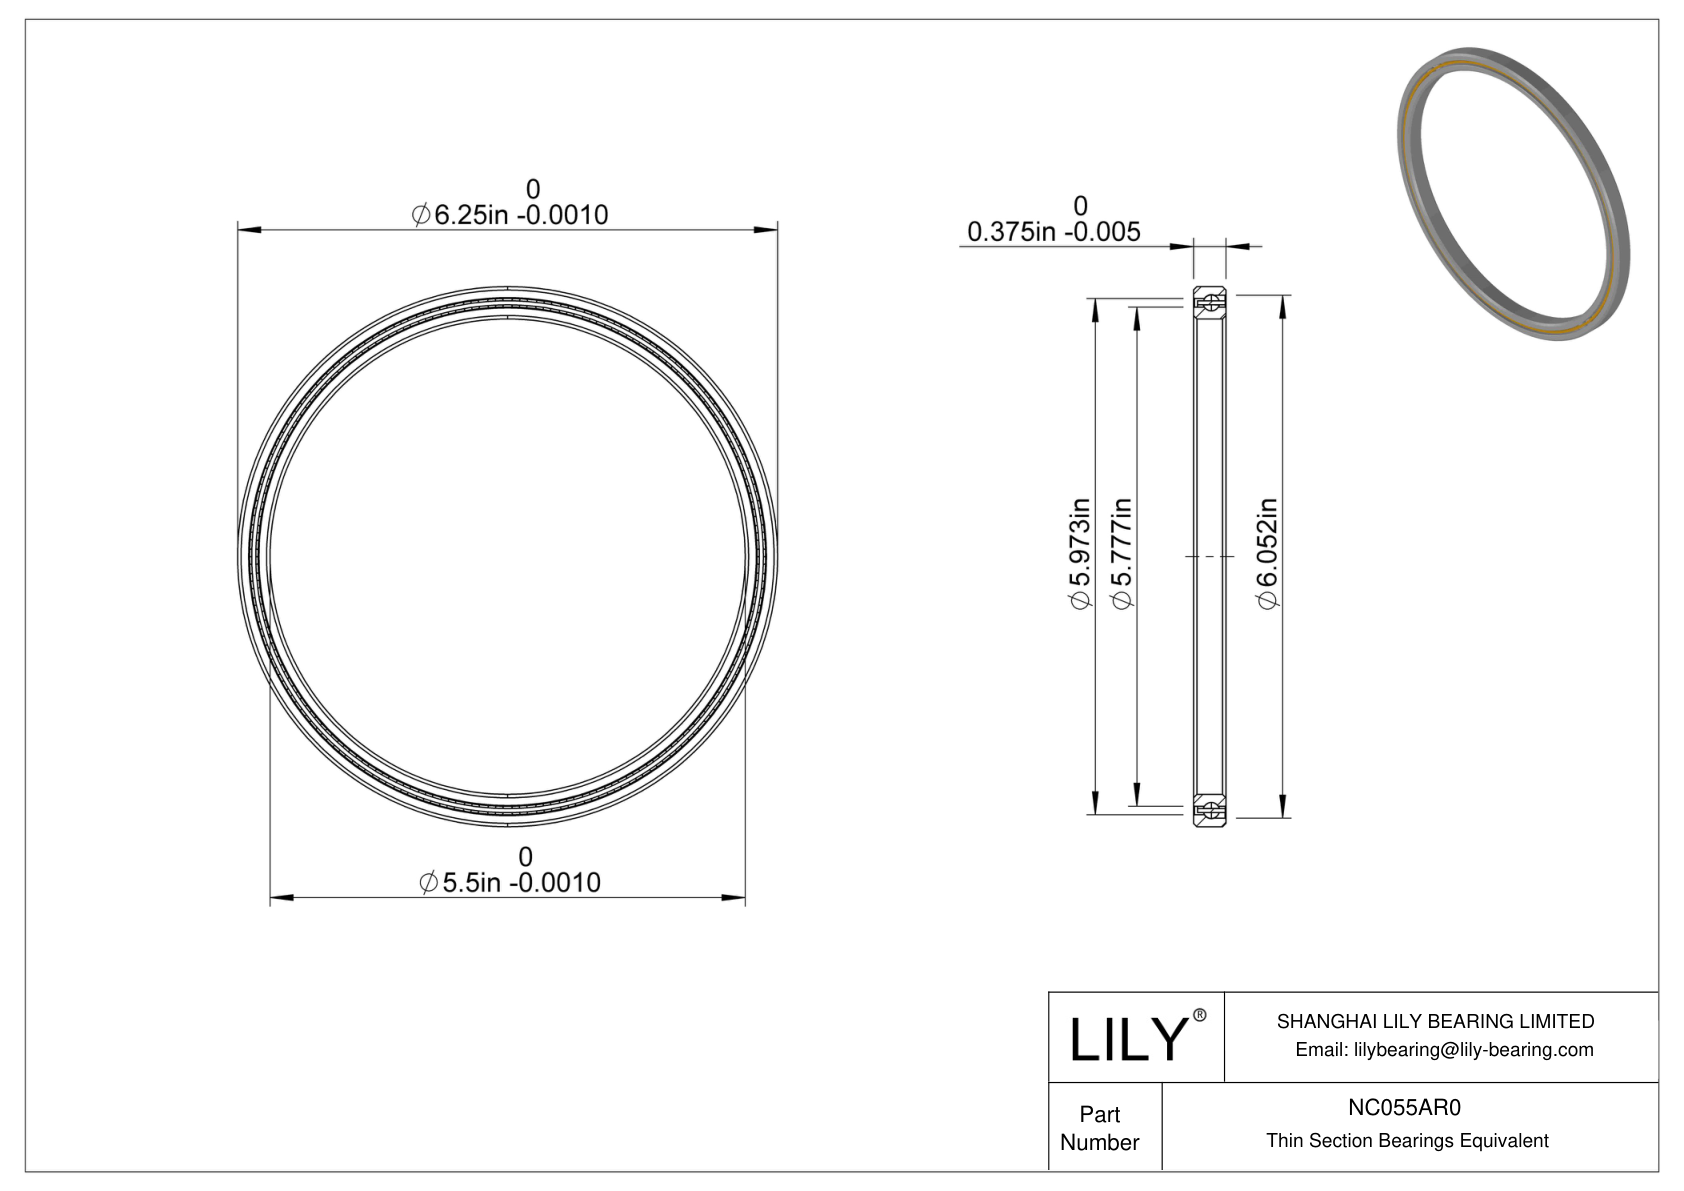 NC055AR0 Constant Section (CS) Bearings cad drawing